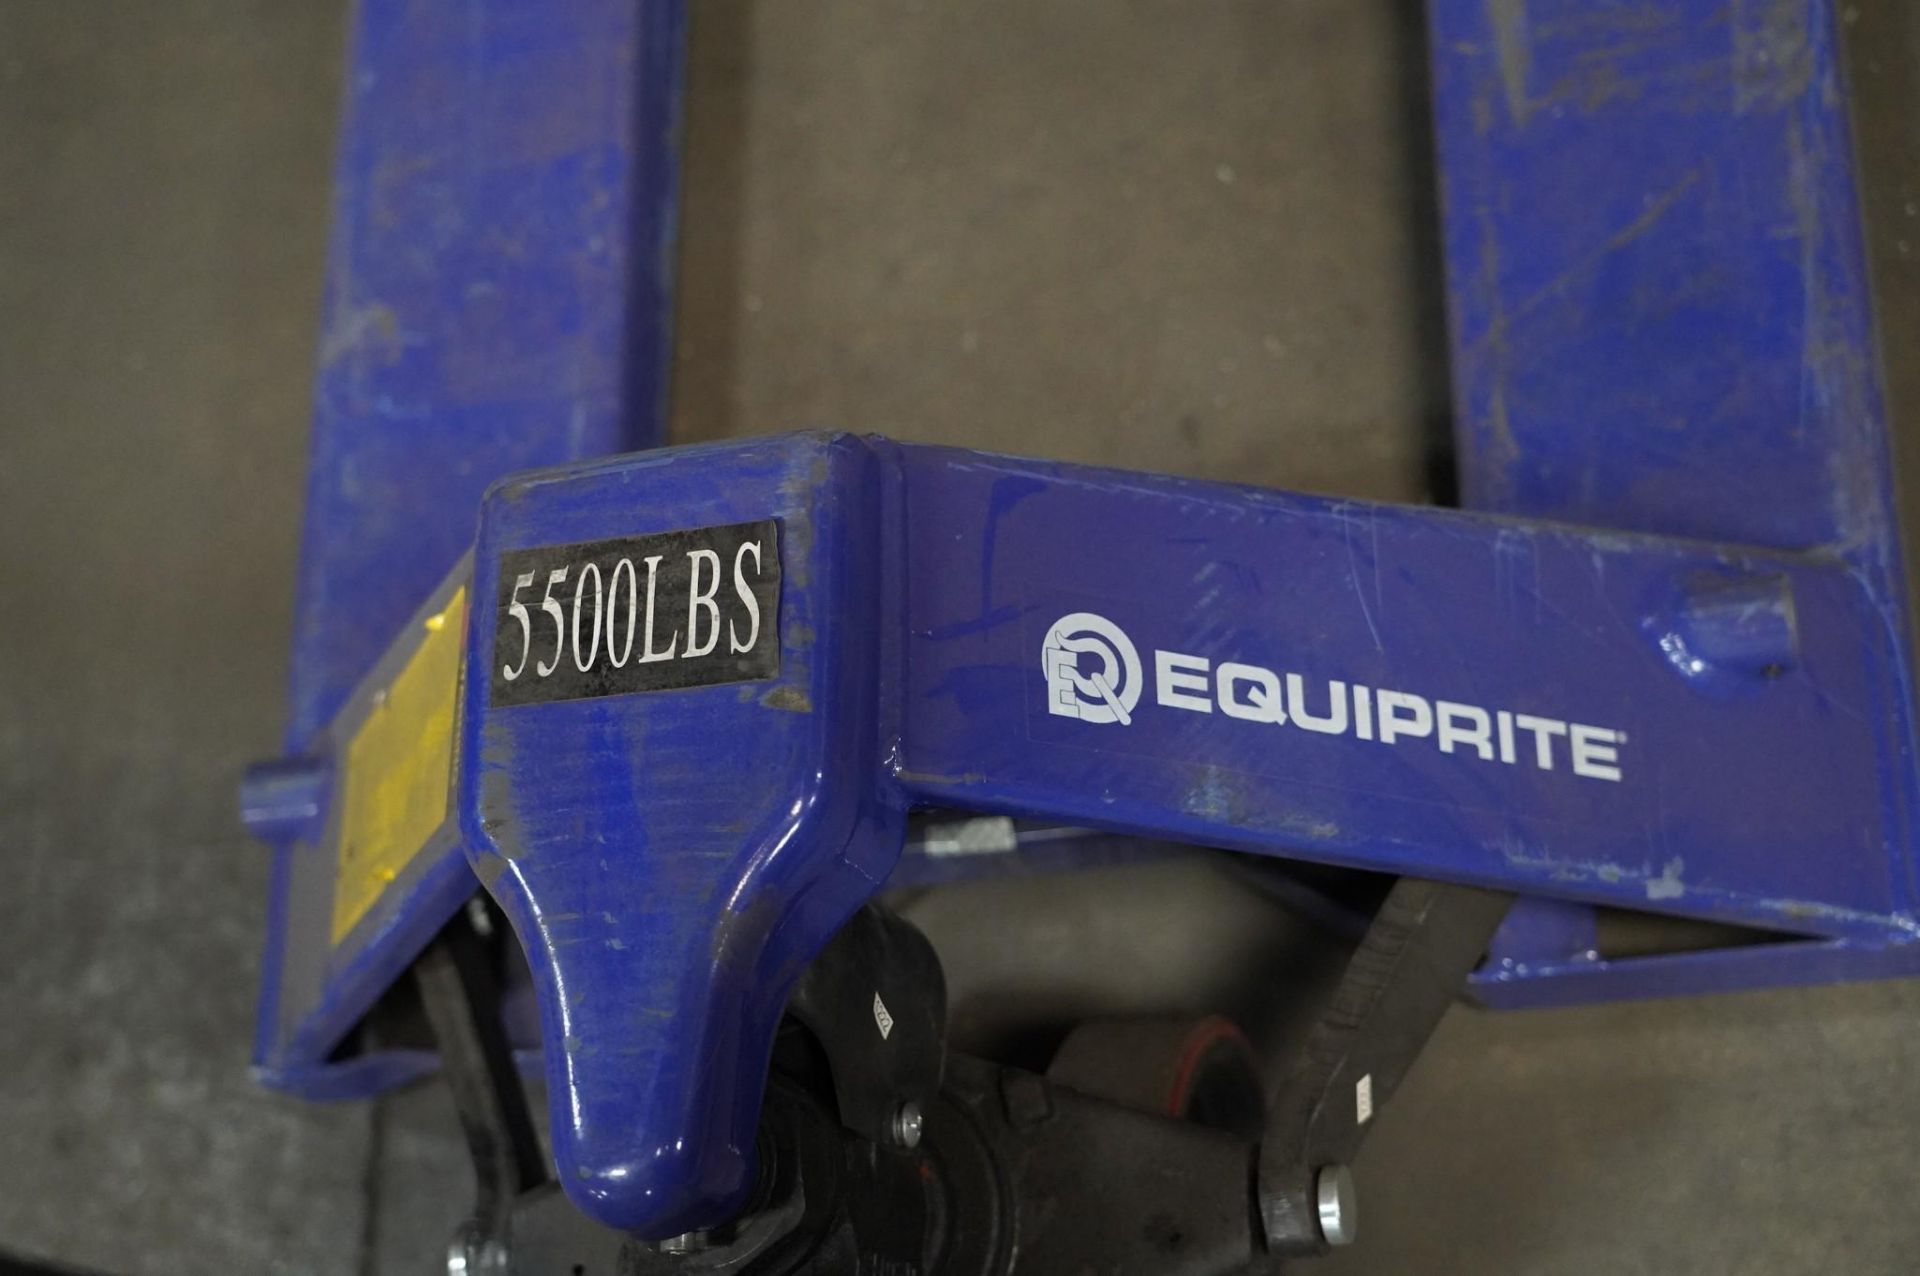 EQUIPRITE 5,500 LBS. CAPACITY PALLET JACK - Image 2 of 2